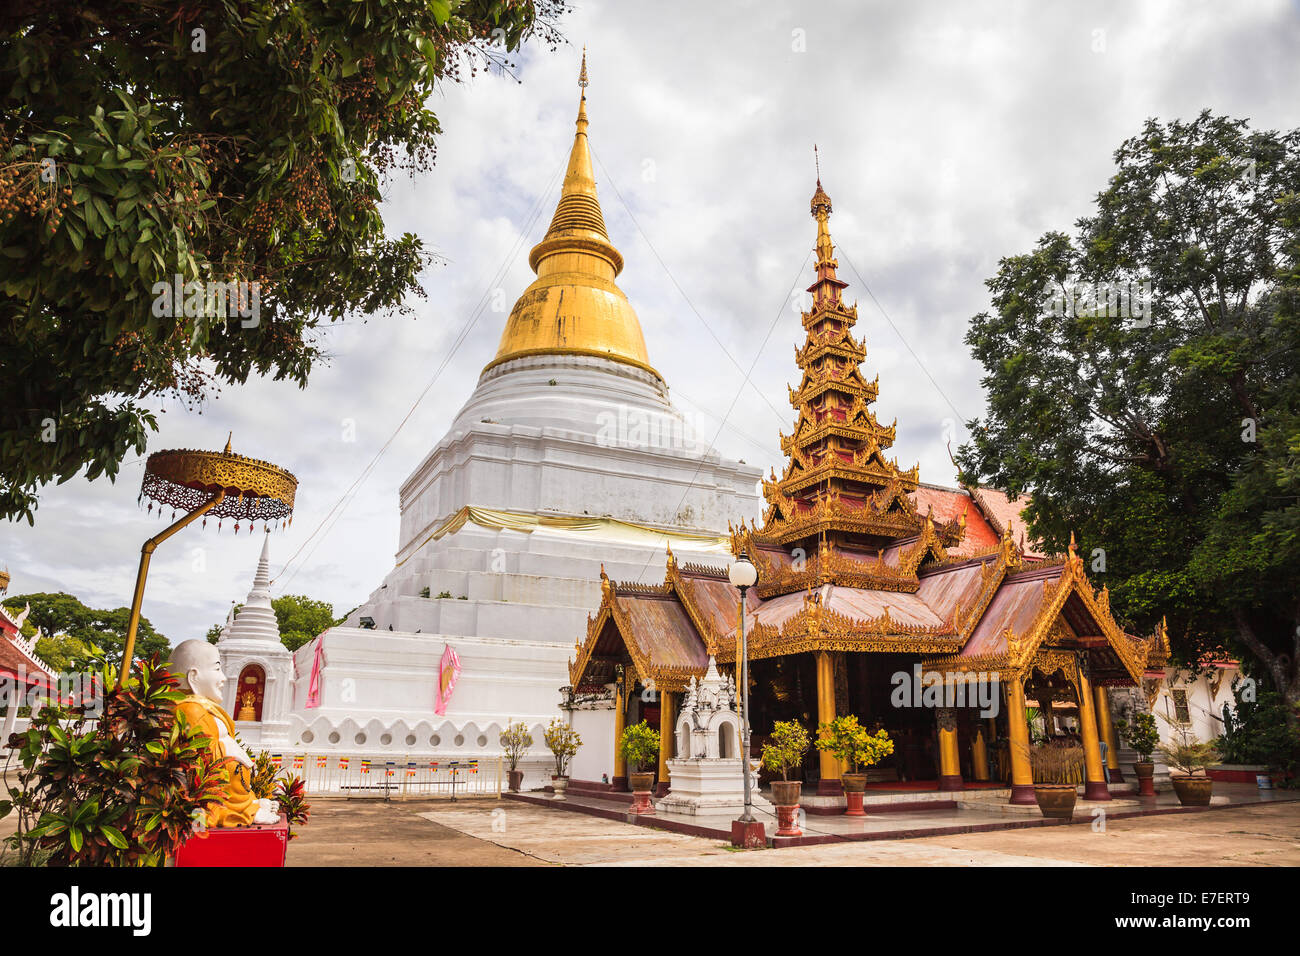 Ancient golden pagoda and myanmar style viharn at buddhist temple in lampang province, thailand Stock Photo